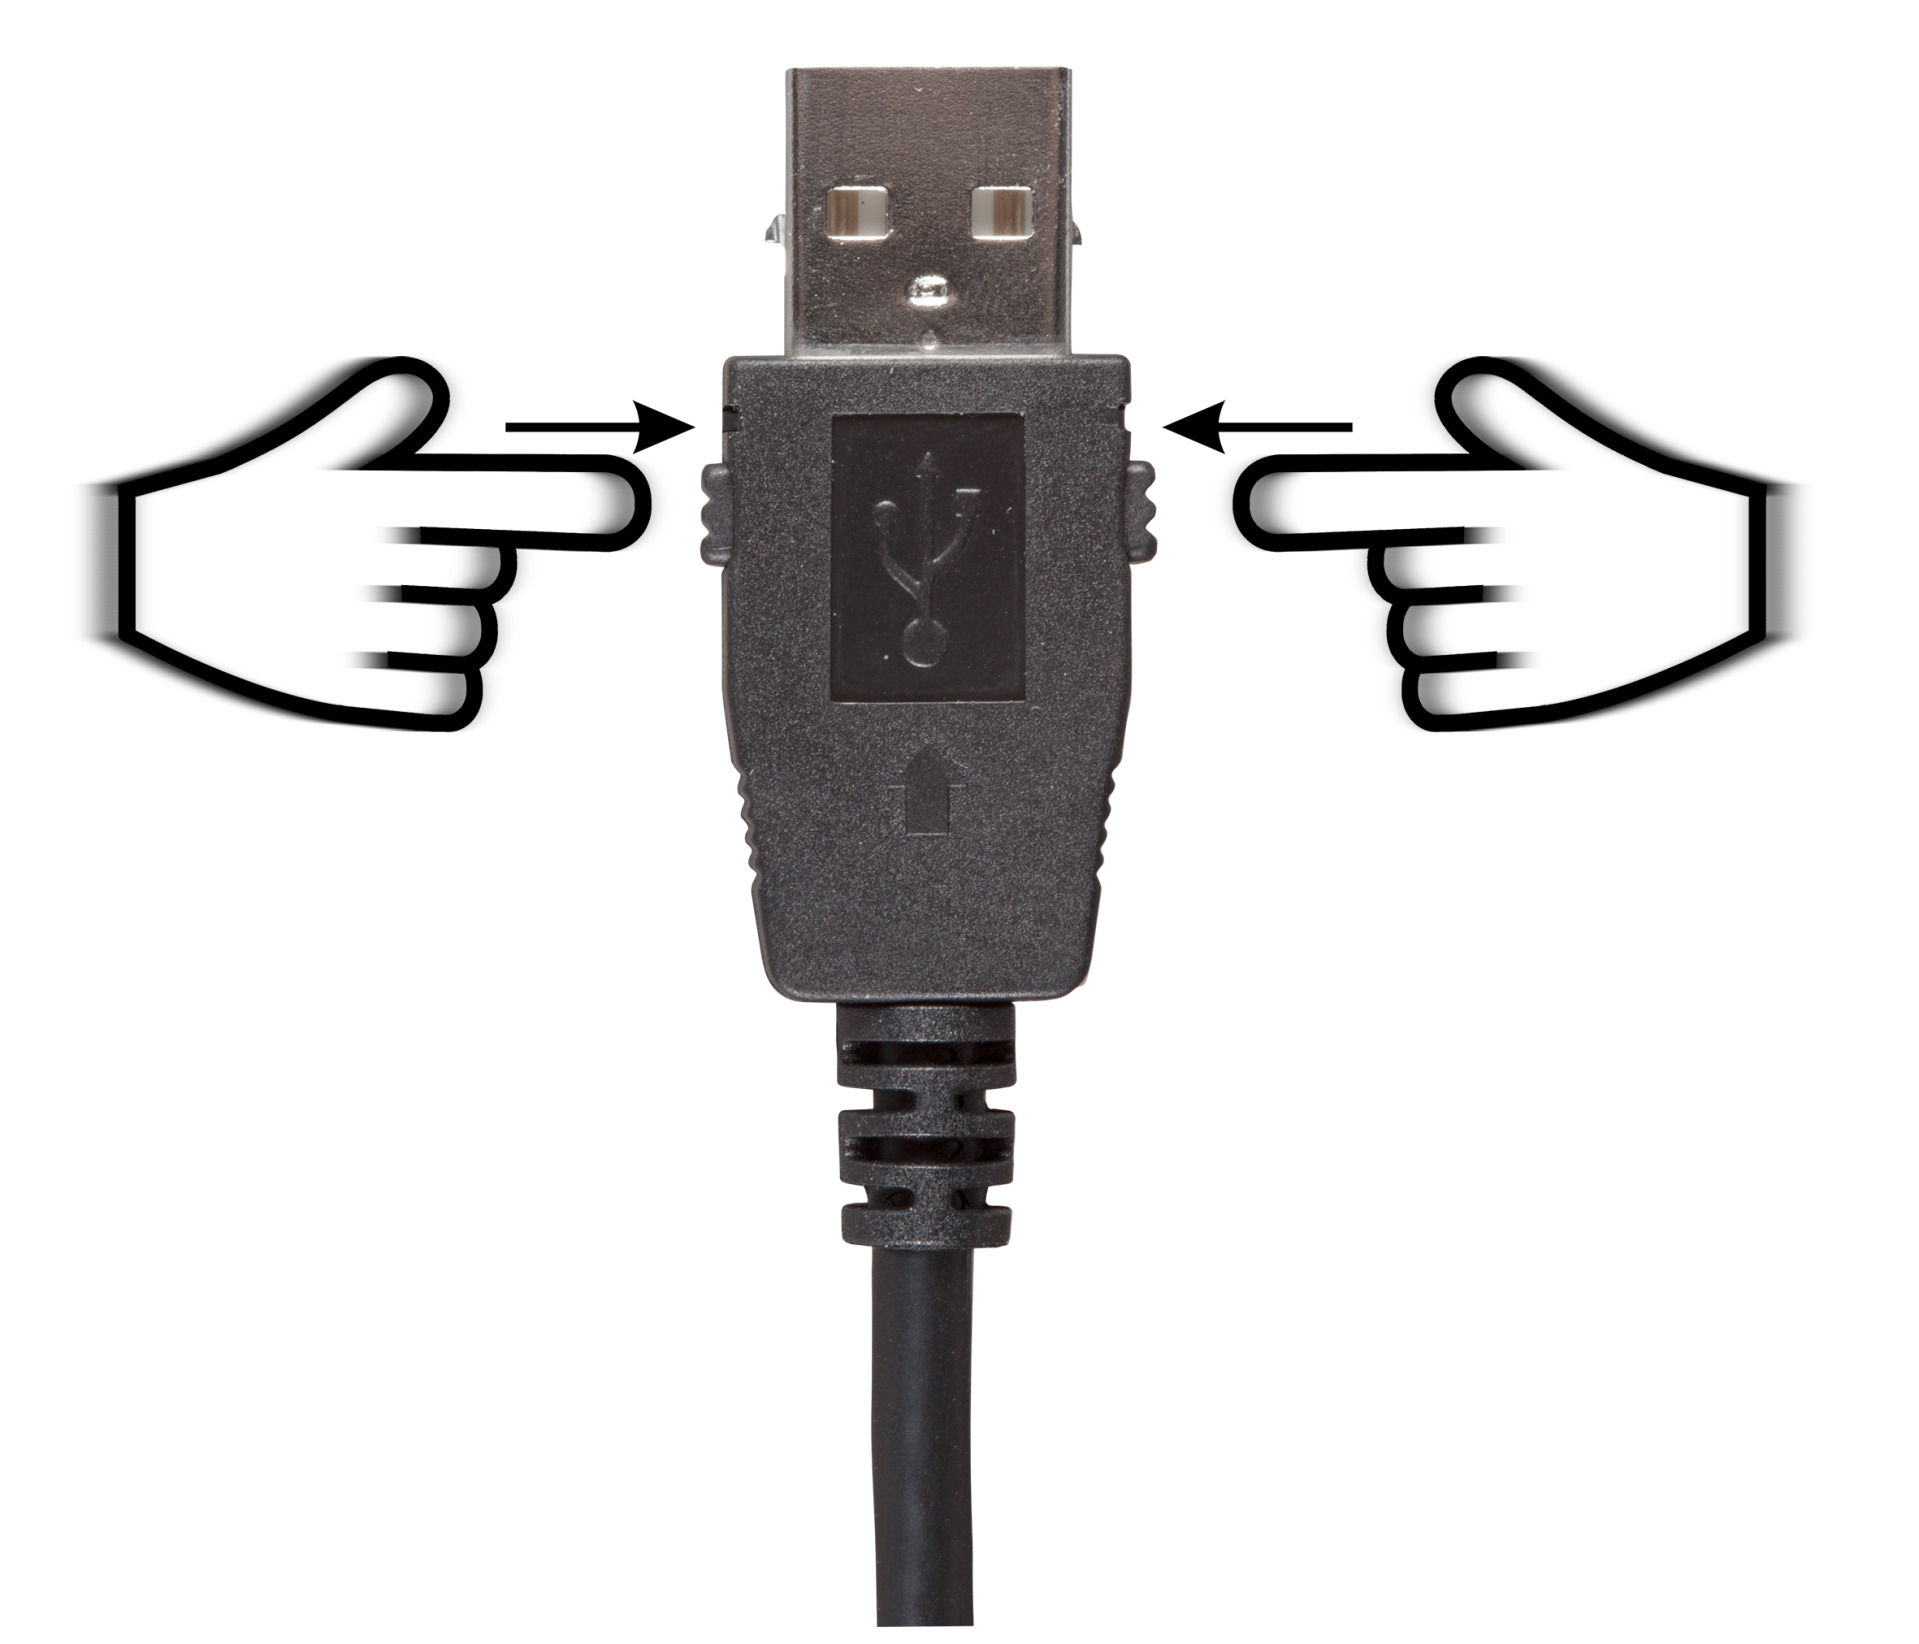 USB2.0 Connection Cable A-A, M-M, 1.0m, Classic, both-sided lockable